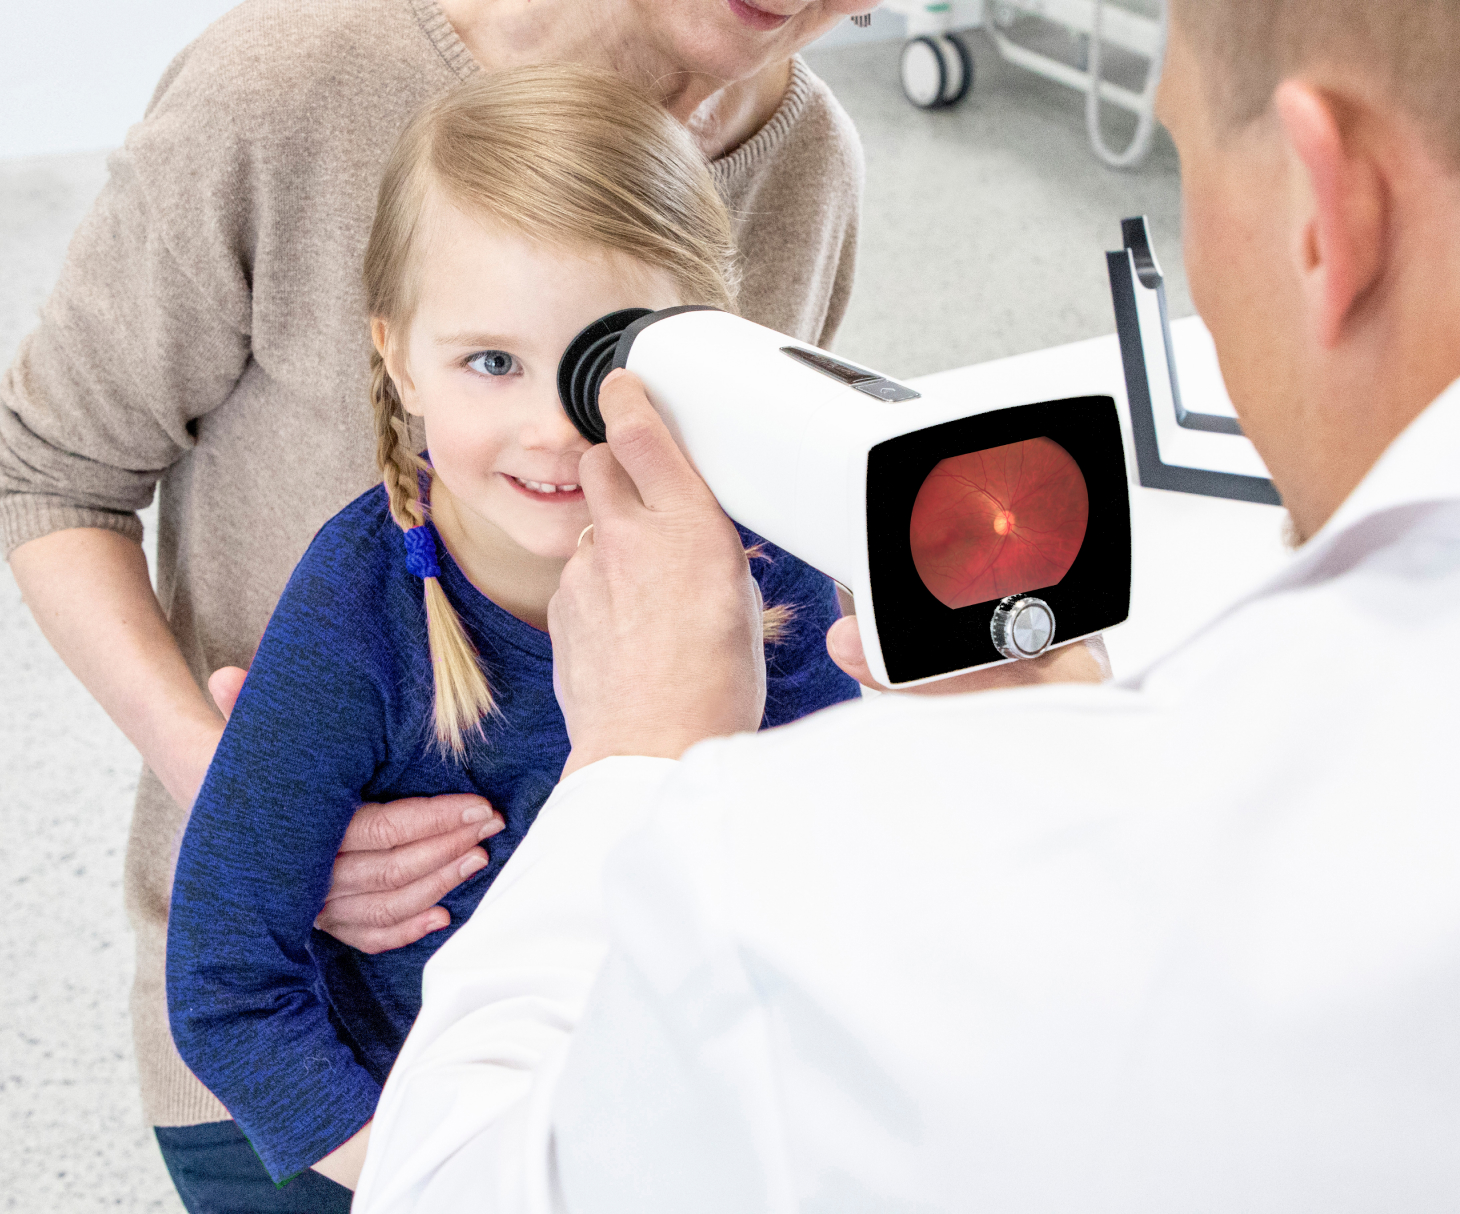 Fundus imaging of a pediatrics patient who is sitting on her grandmother's lap.